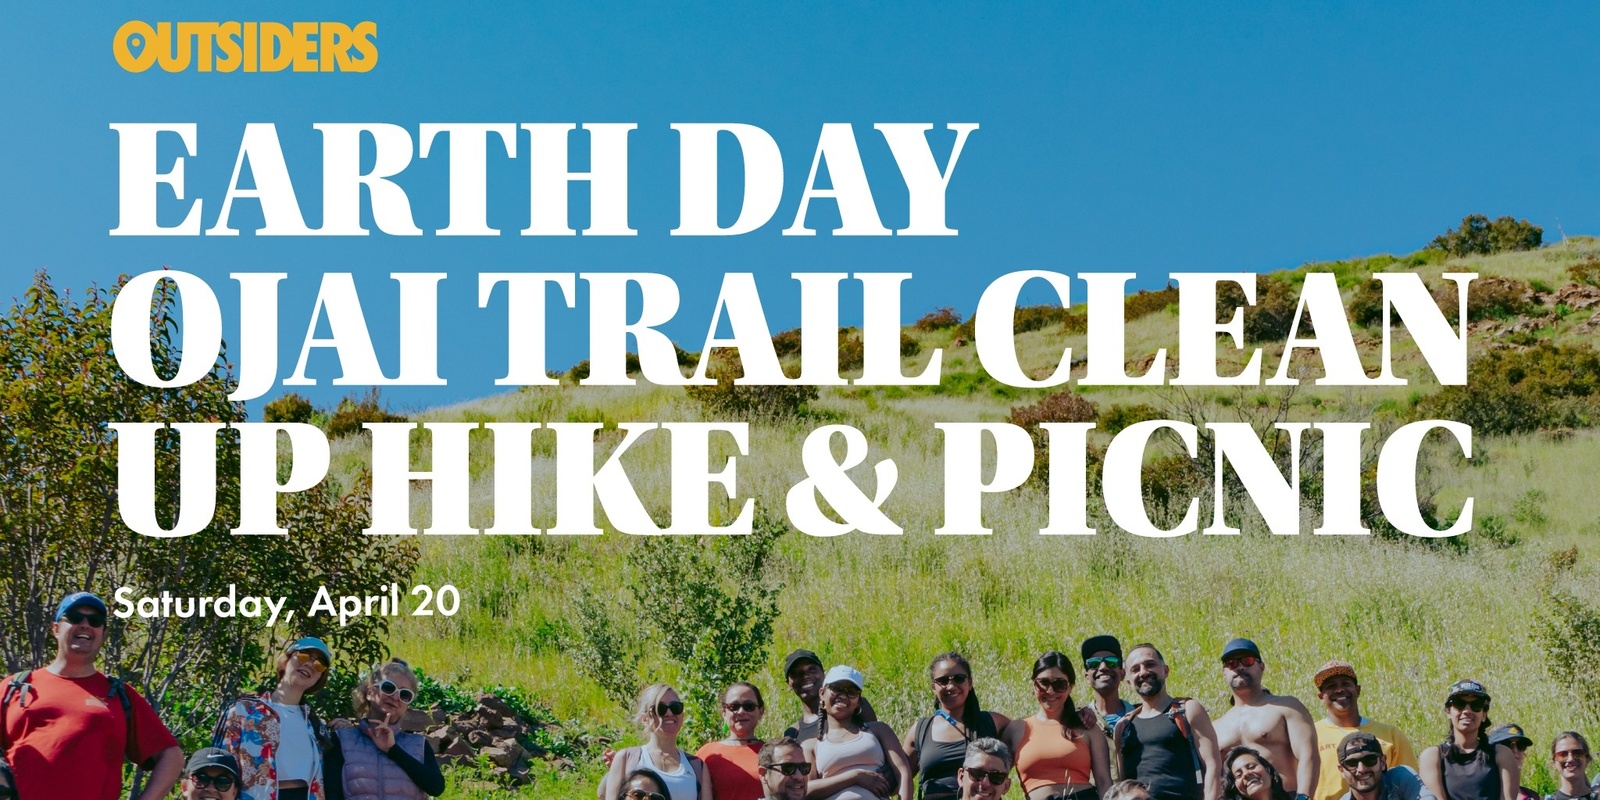 Earth Day Ojai Hike Trail Clean Up & Picnic Humanitix